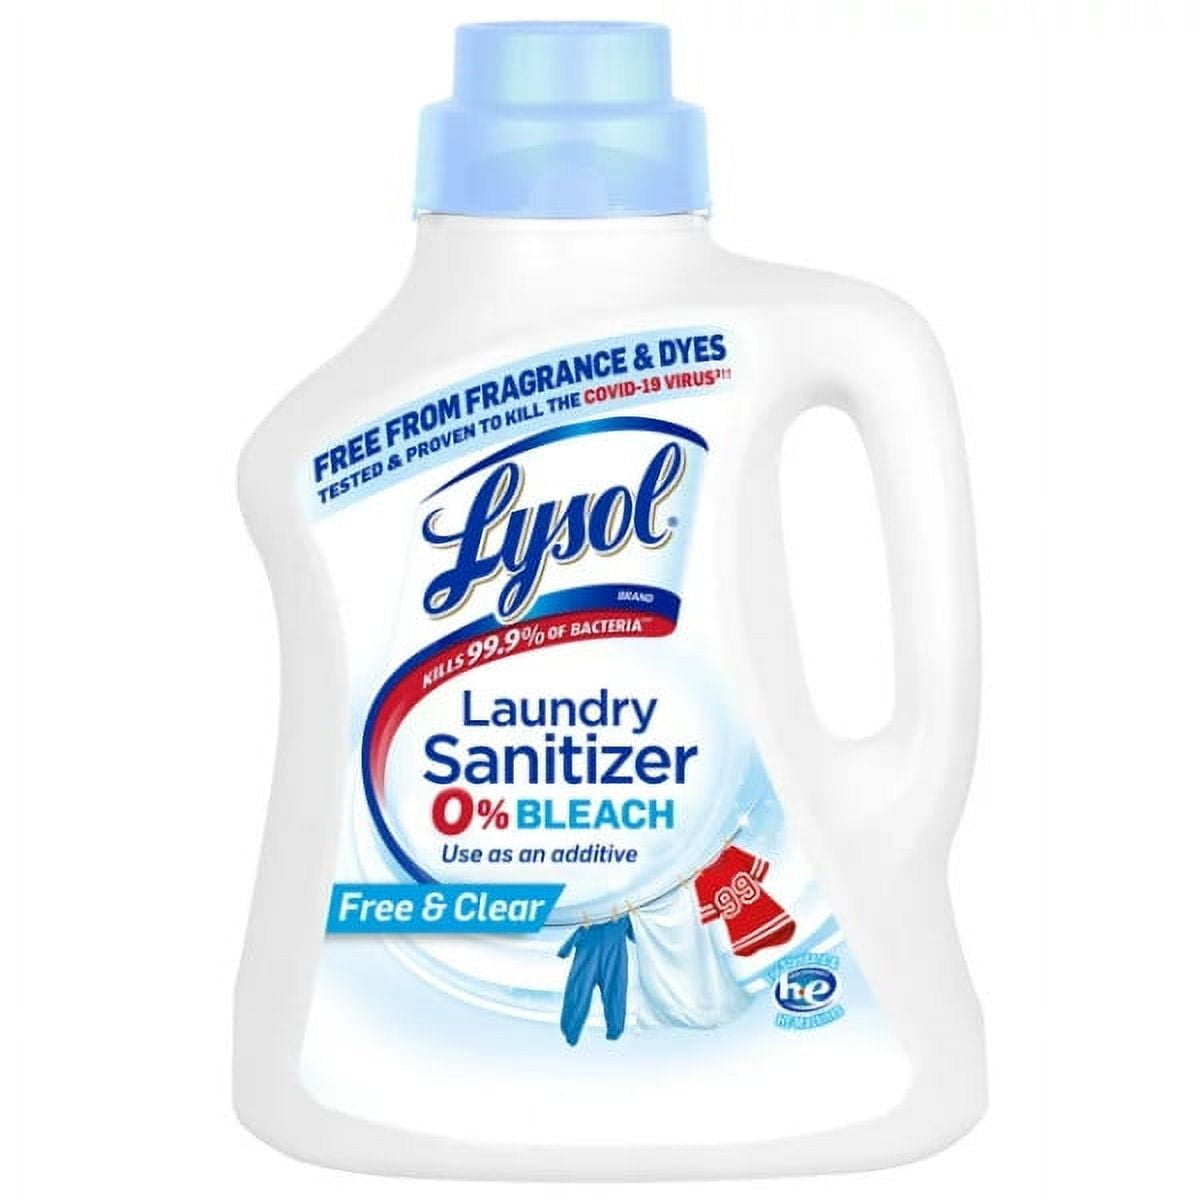  Clorox Laundry Sanitizer, Unscented, 42 Fl Oz : Health &  Household